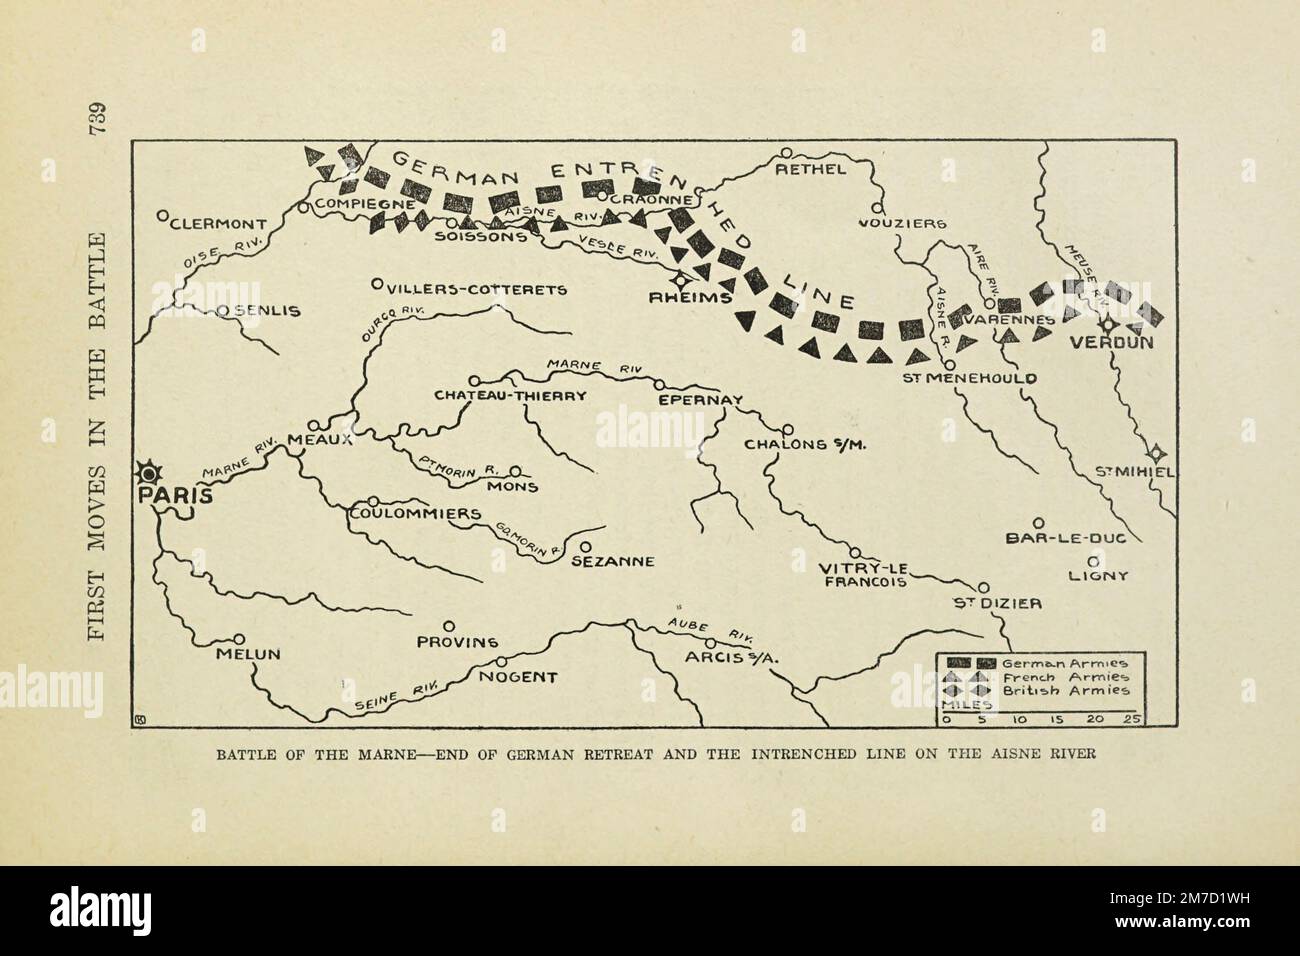 Battle of the Marne - End of German Retreat and the Intrenched Line on the Aisne River from the book The story of the great war; the complete historical records of events to date DIPLOMATIC AND STATE PAPERS by Reynolds, Francis Joseph, 1867-1937; Churchill, Allen Leon; Miller, Francis Trevelyan, 1877-1959; Wood, Leonard, 1860-1927; Knight, Austin Melvin, 1854-1927; Palmer, Frederick, 1873-1958; Simonds, Frank Herbert, 1878-; Ruhl, Arthur Brown, 1876-  Volume III Published 1916 Stock Photo